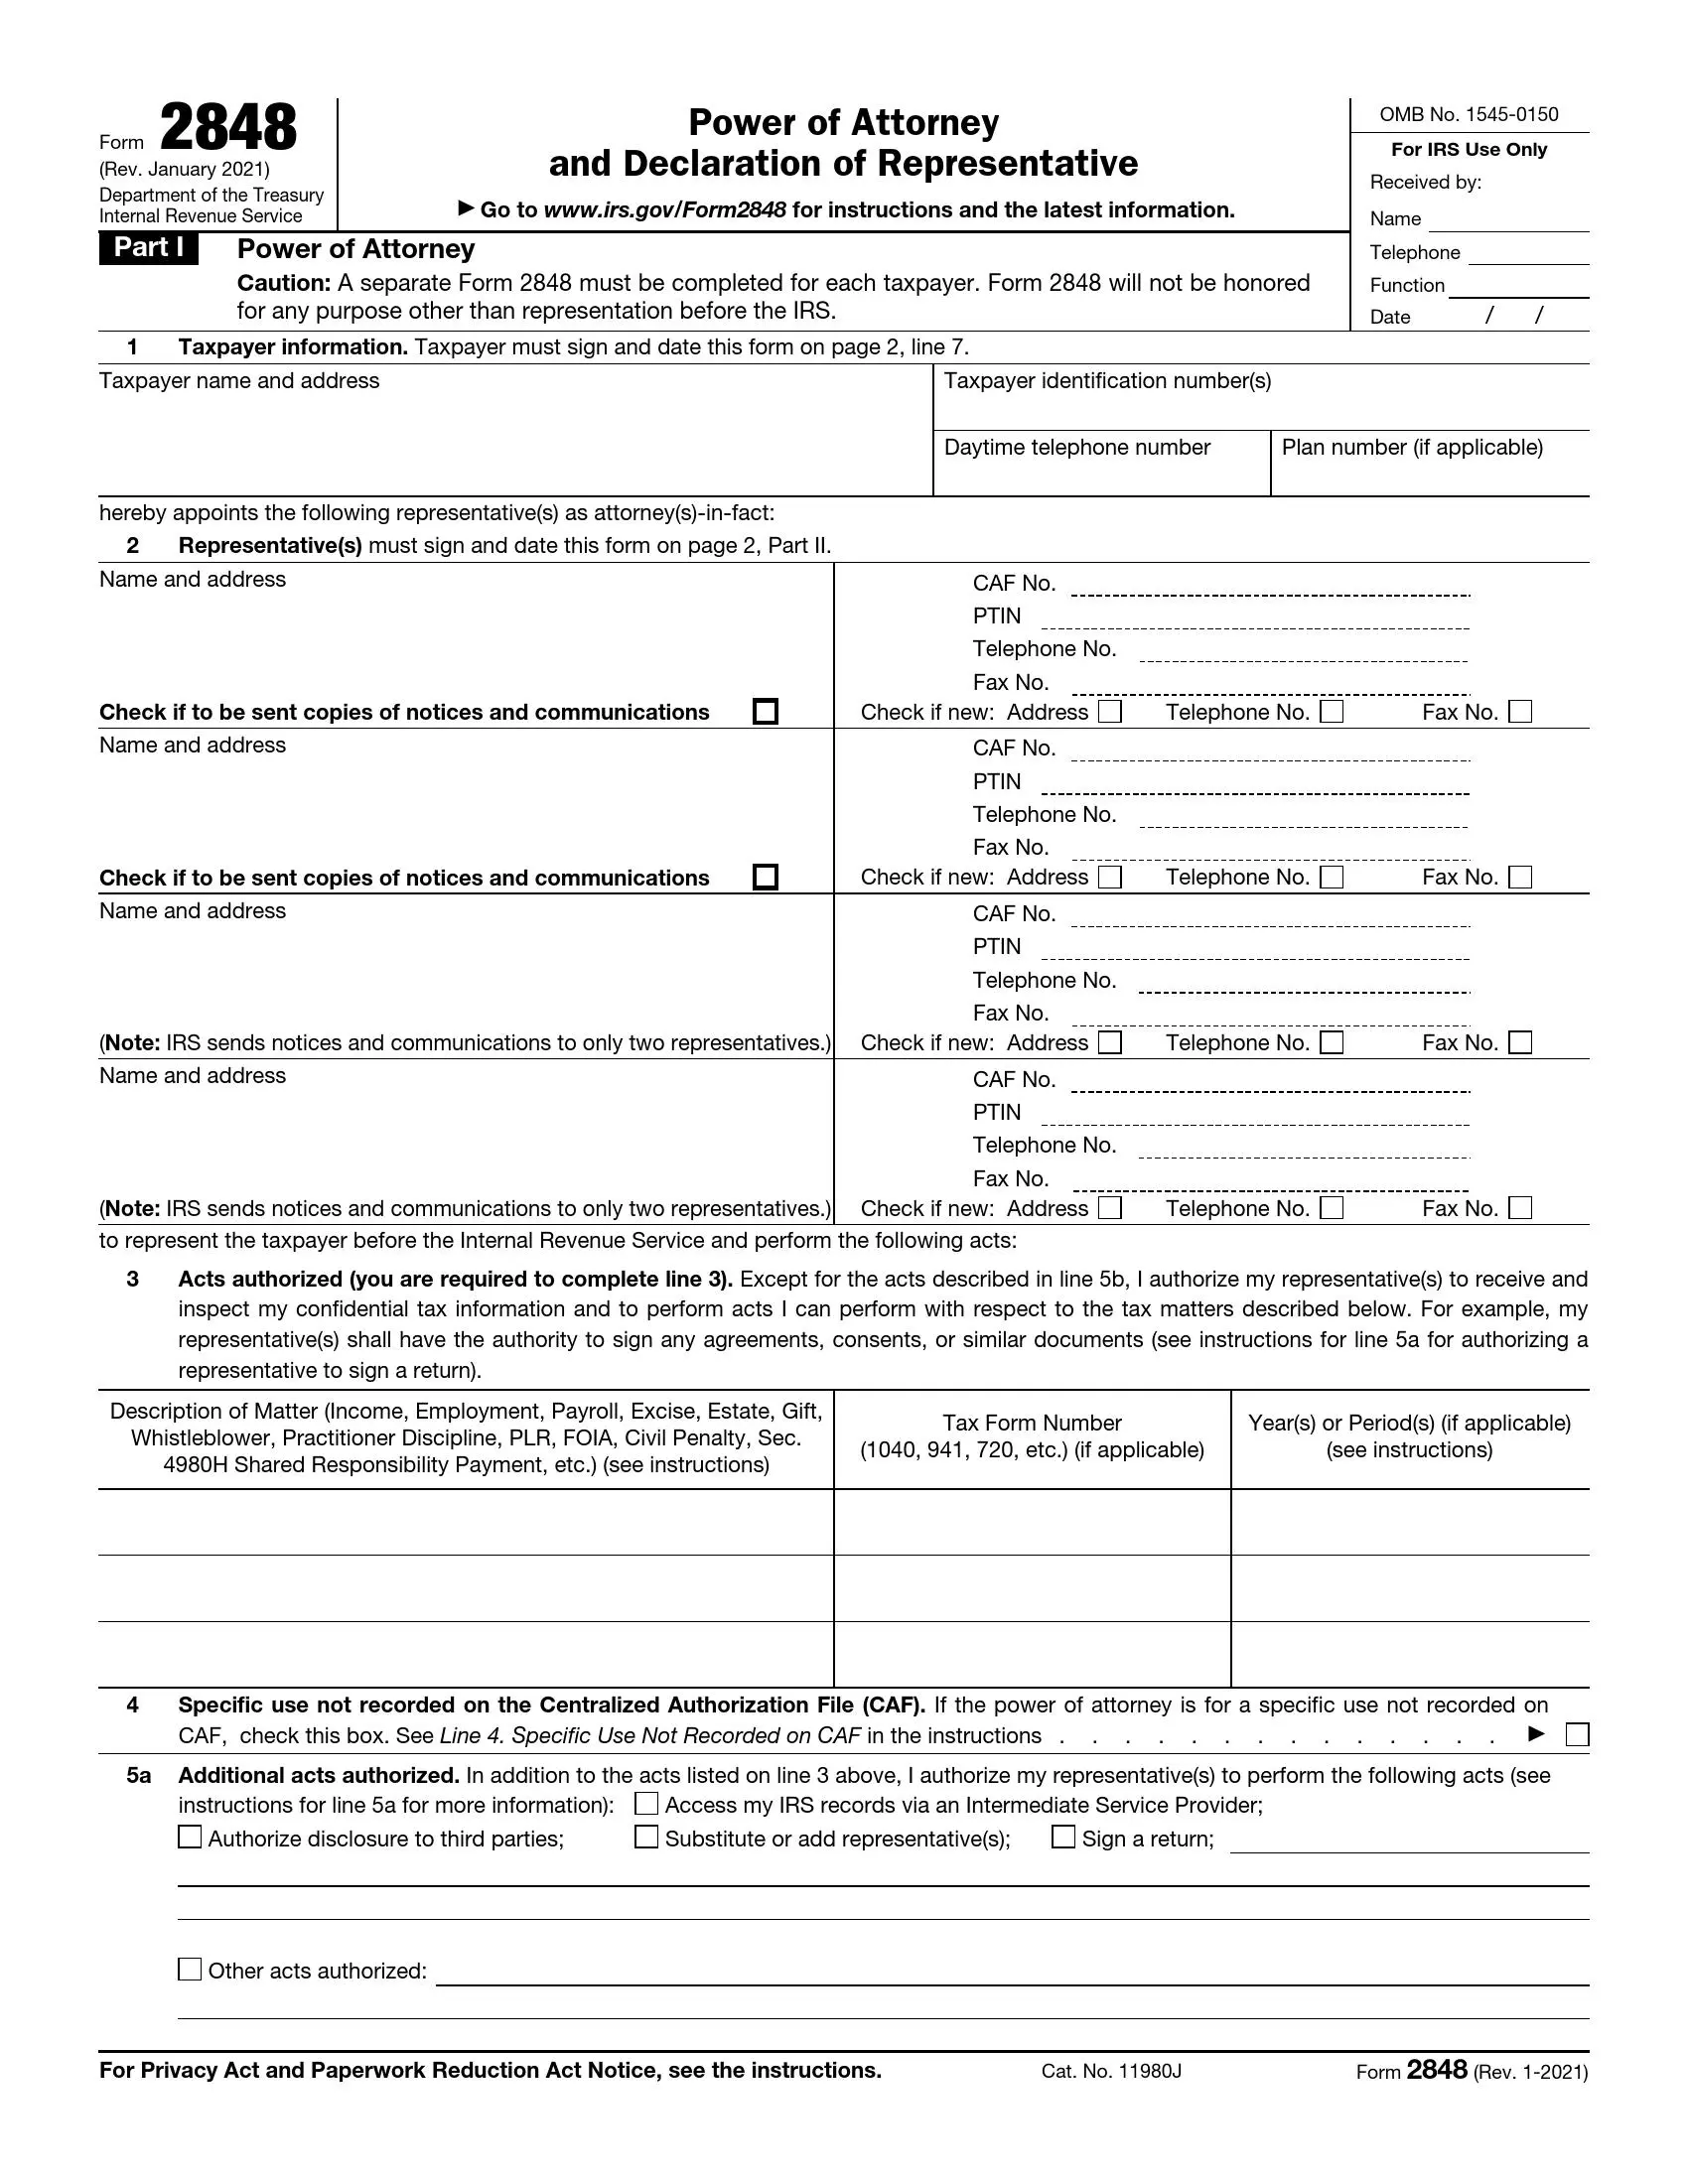 irs form 2848 preview